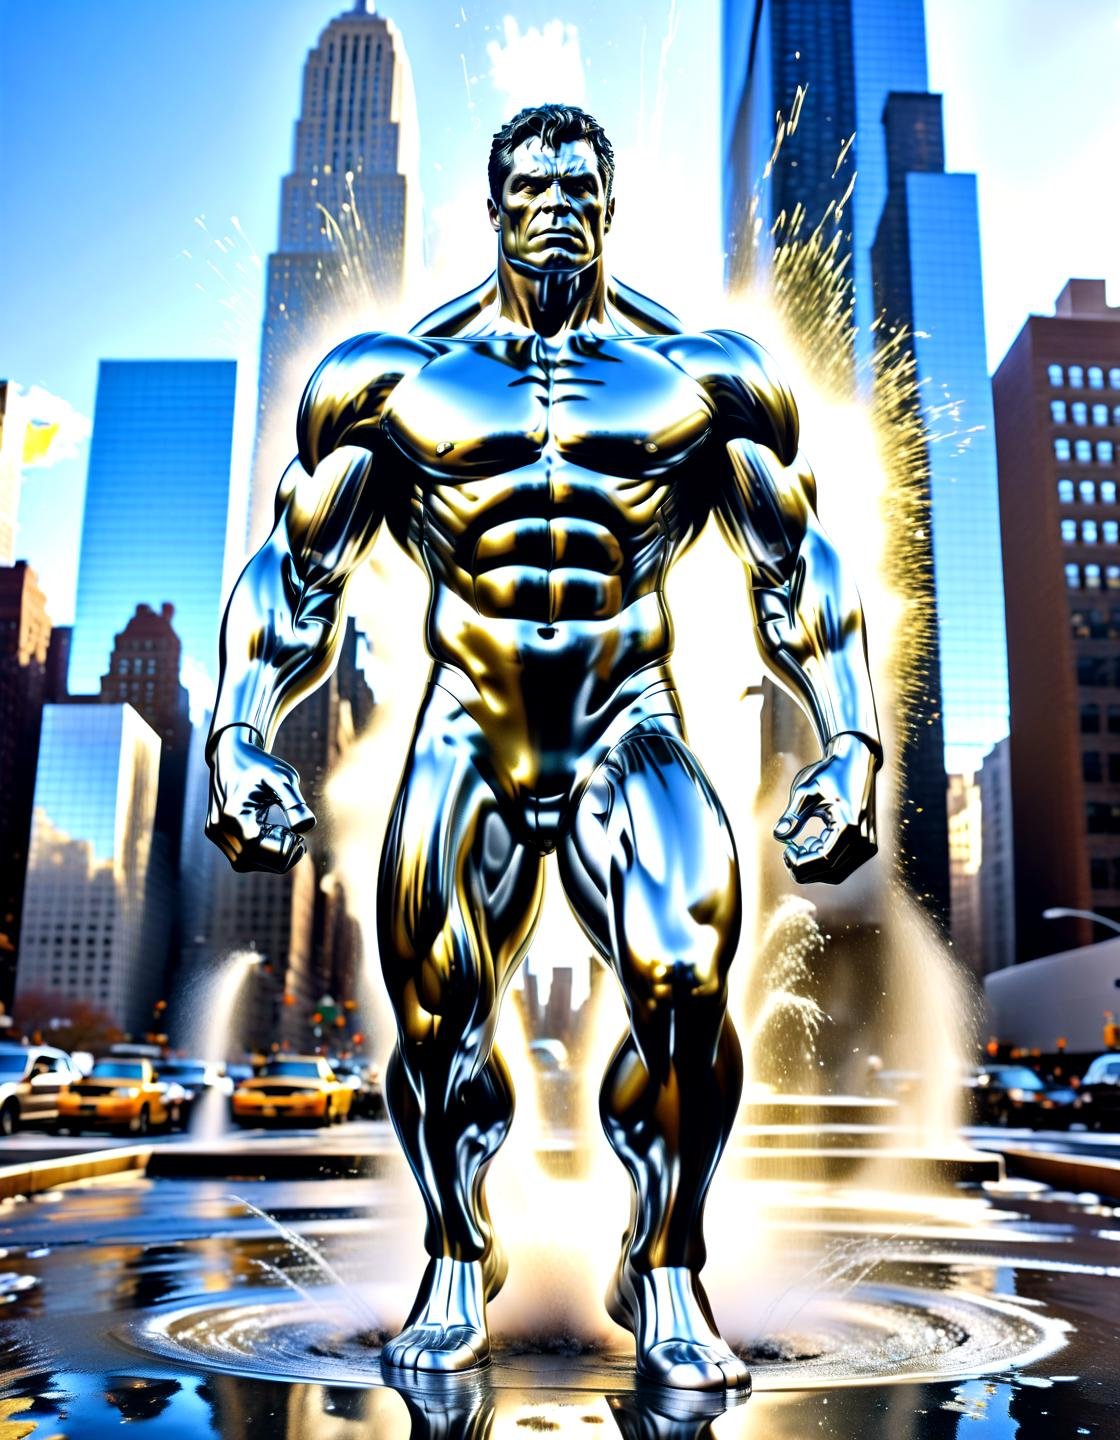 Action Films the hulk chrome skin,in new york city, polished metal, cable, raining, explosion, smoke, fire, black hair, broken demin pant,,, Action Films, often for intense sequences, heroic characters, or adrenaline-fueled excitement.